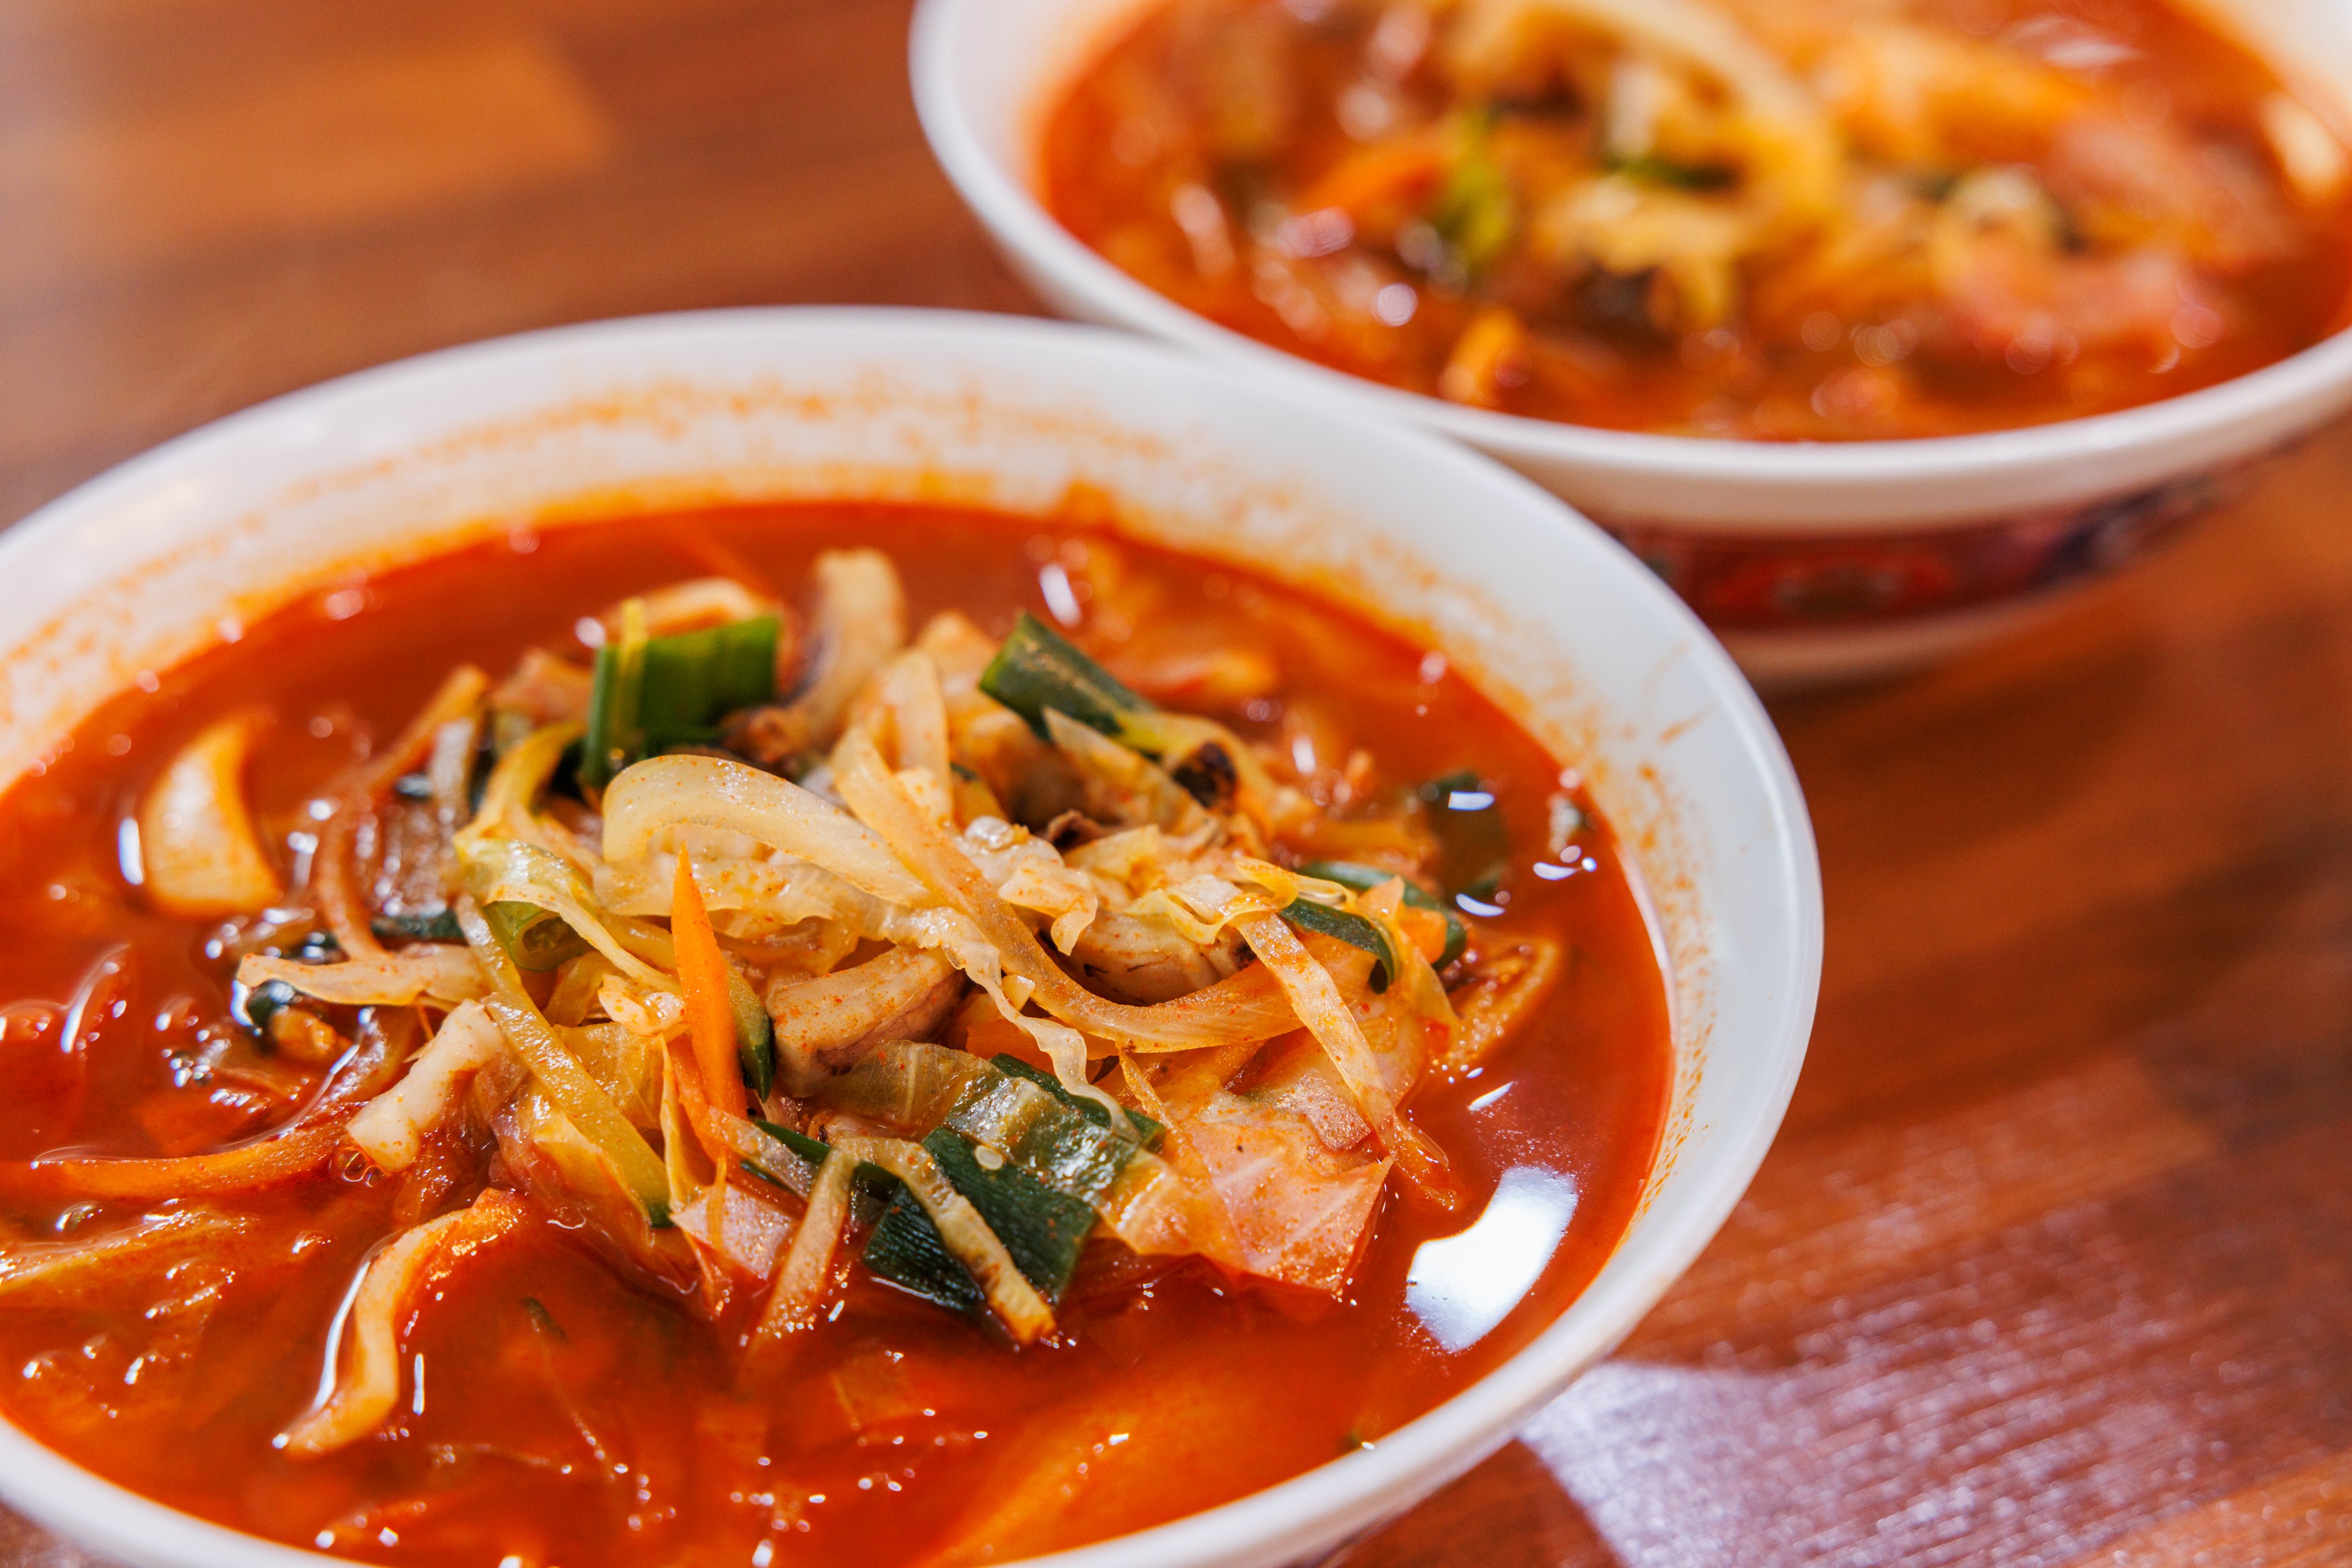 Read more about the article “My go-to Hangover Cure: A Broth that Hits the Spot”